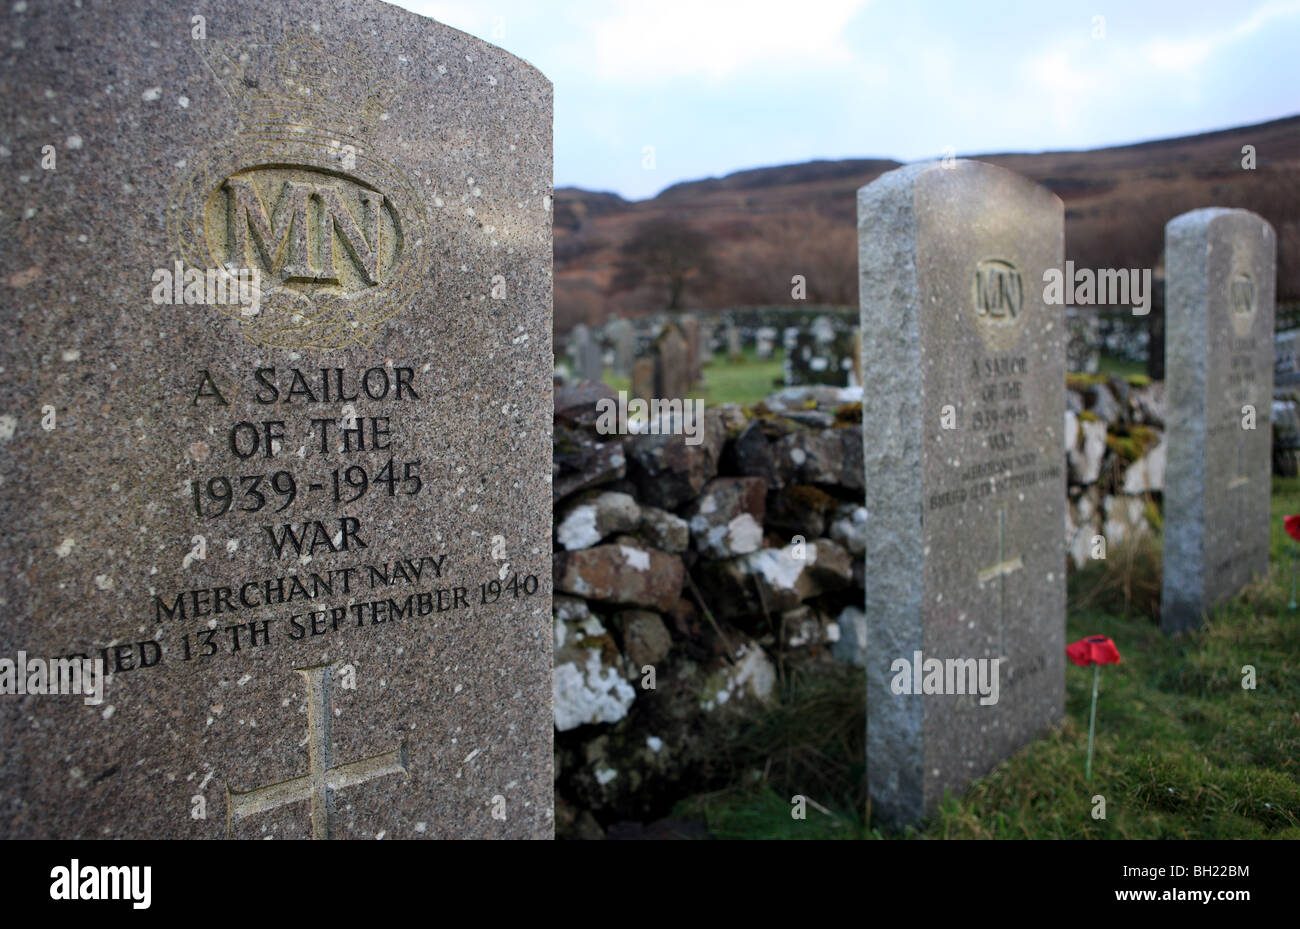 War graves of unknown sailors of the Merchant Navy from World War 2 buried on the Isle of Mull Stock Photo